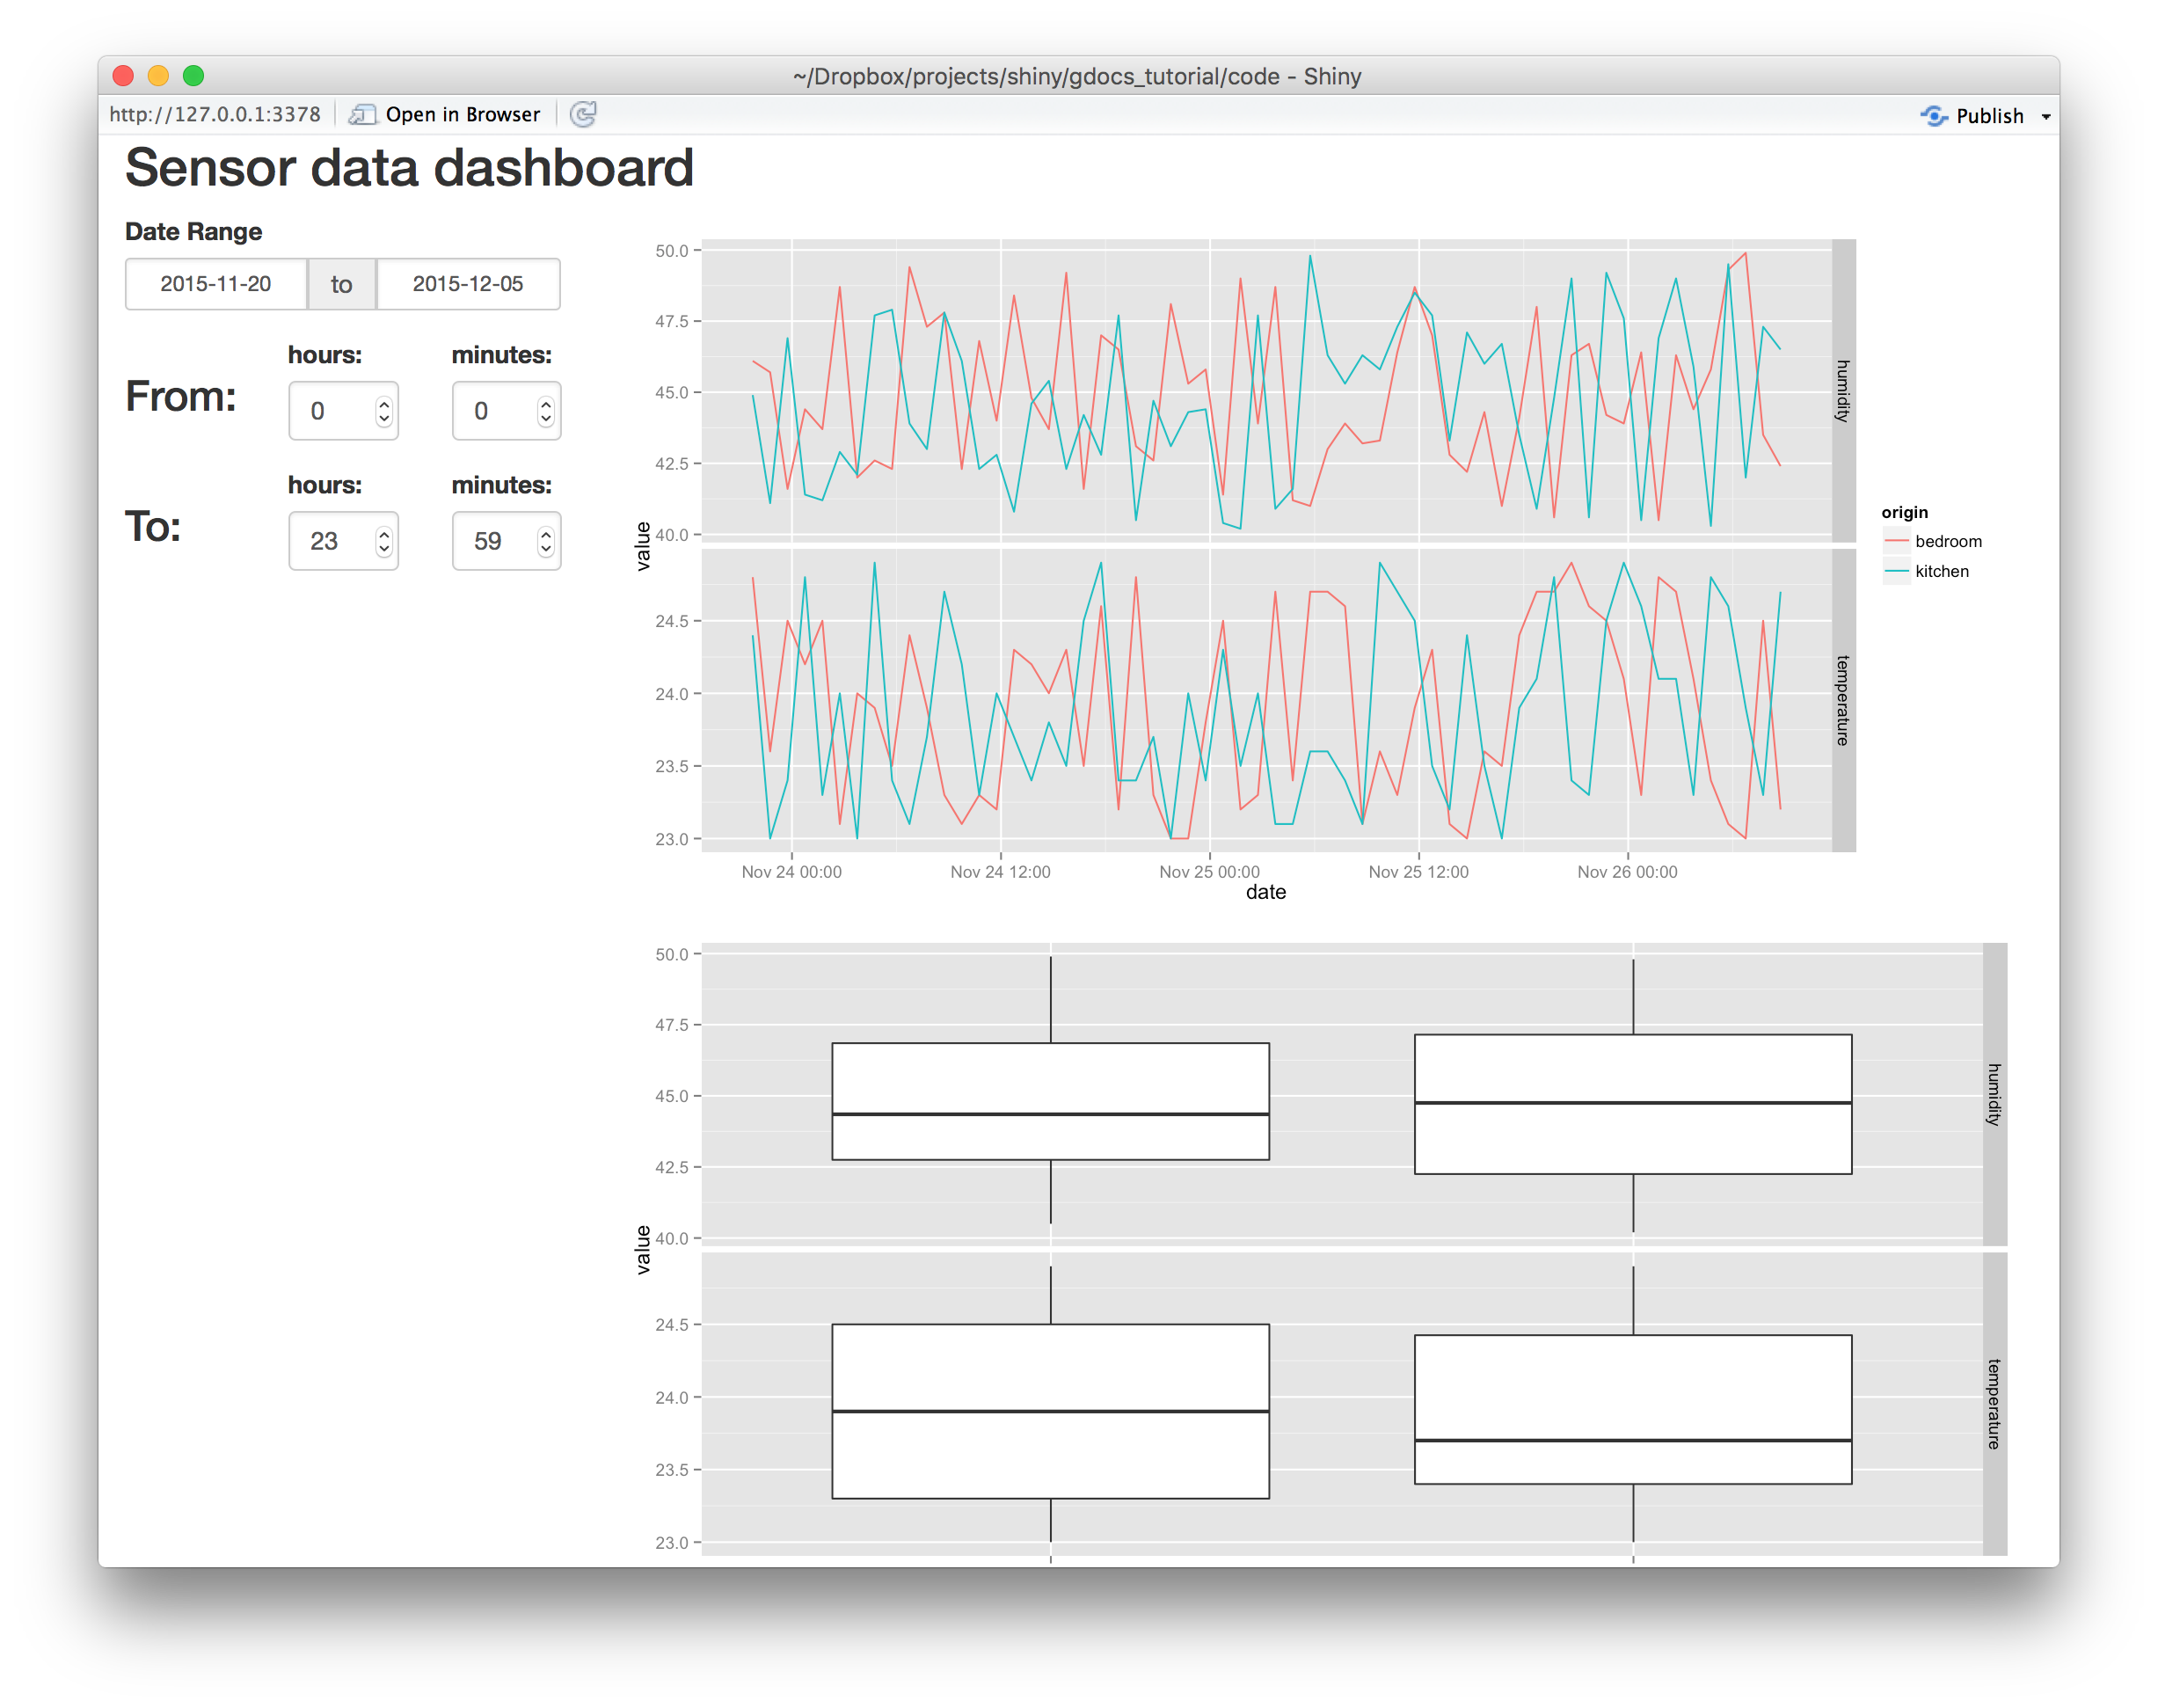 Our improved dashboard, now with date range selection